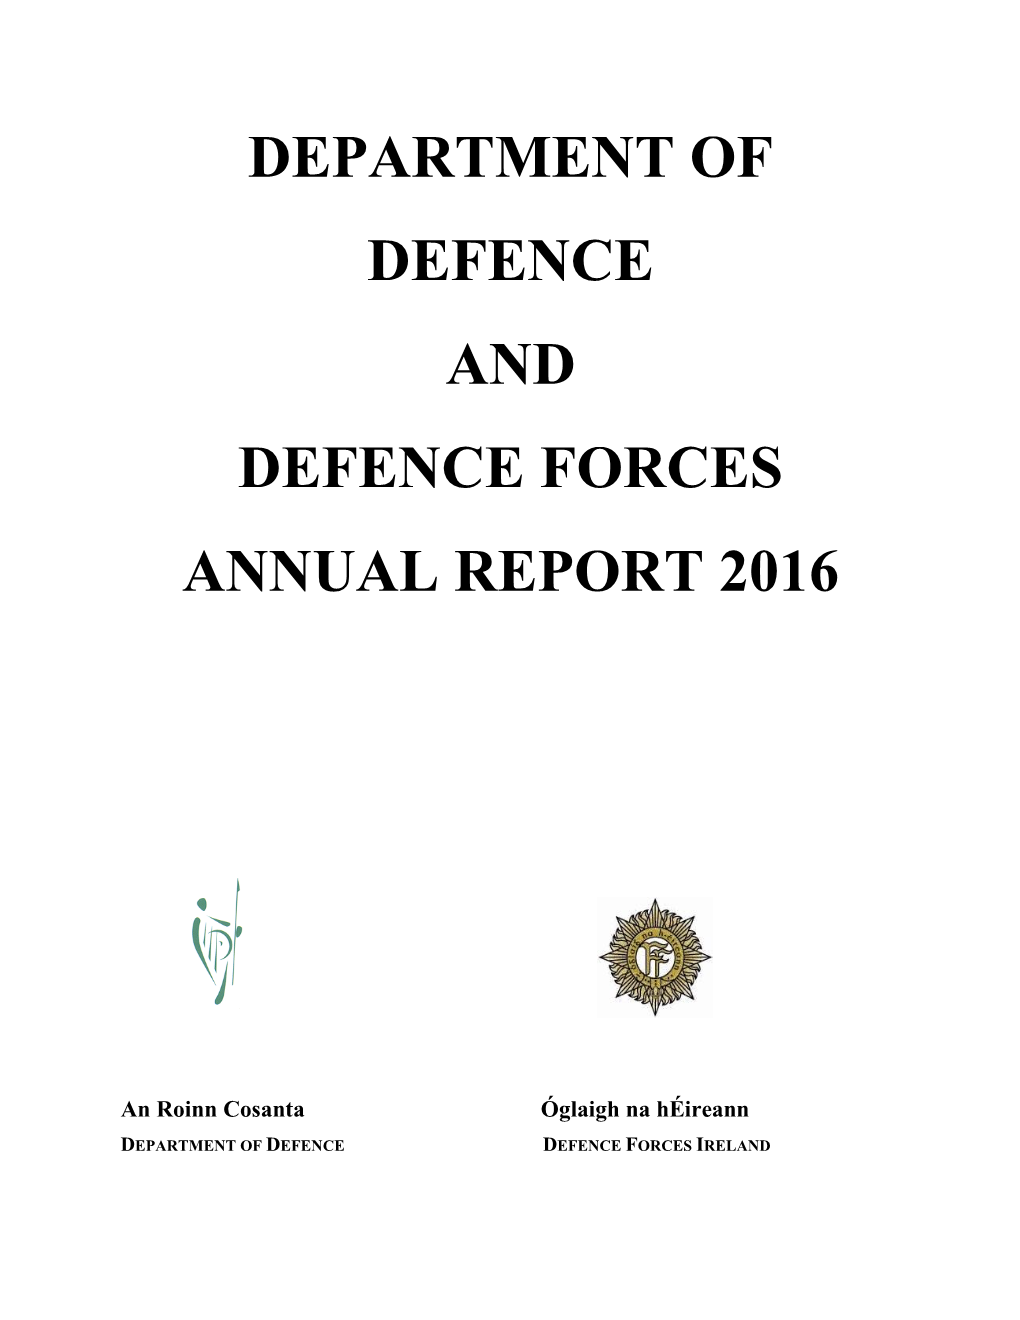 Dept of Defence & Defence Forces Annual Report 2016